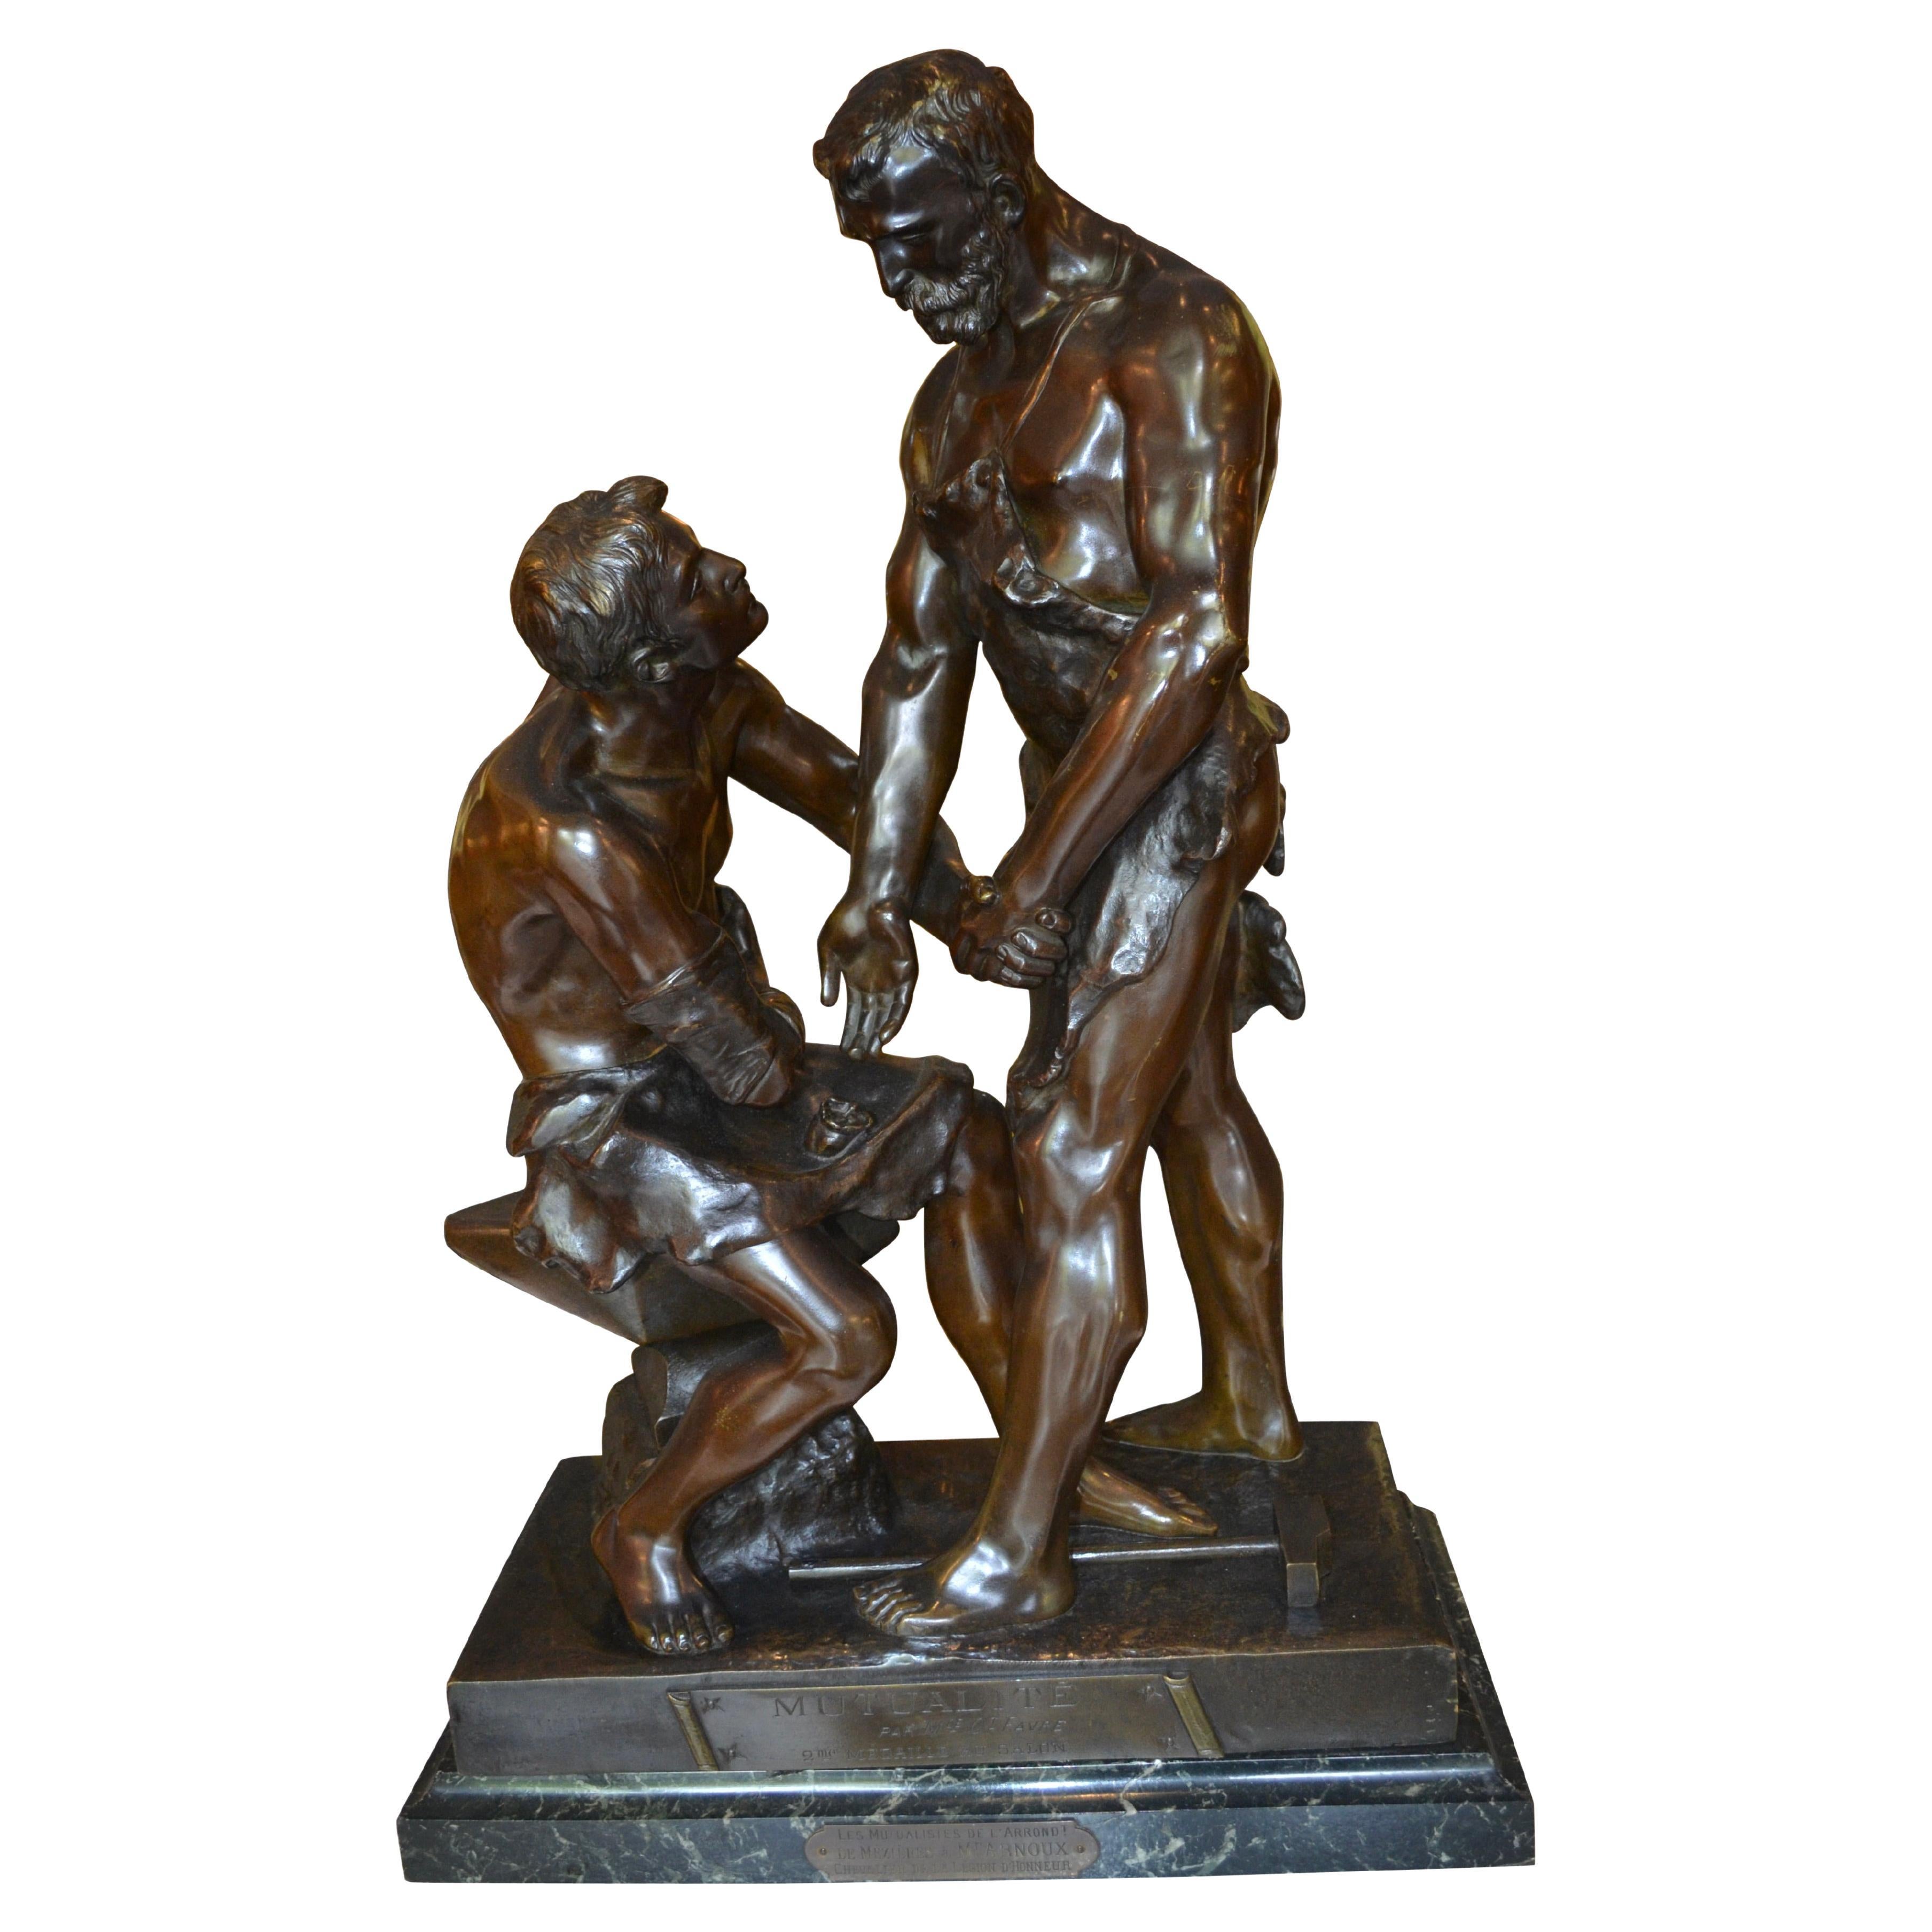 Rare 19 Century Bronze Statue Titled "Mutualite" by Maurice Constant Favre For Sale